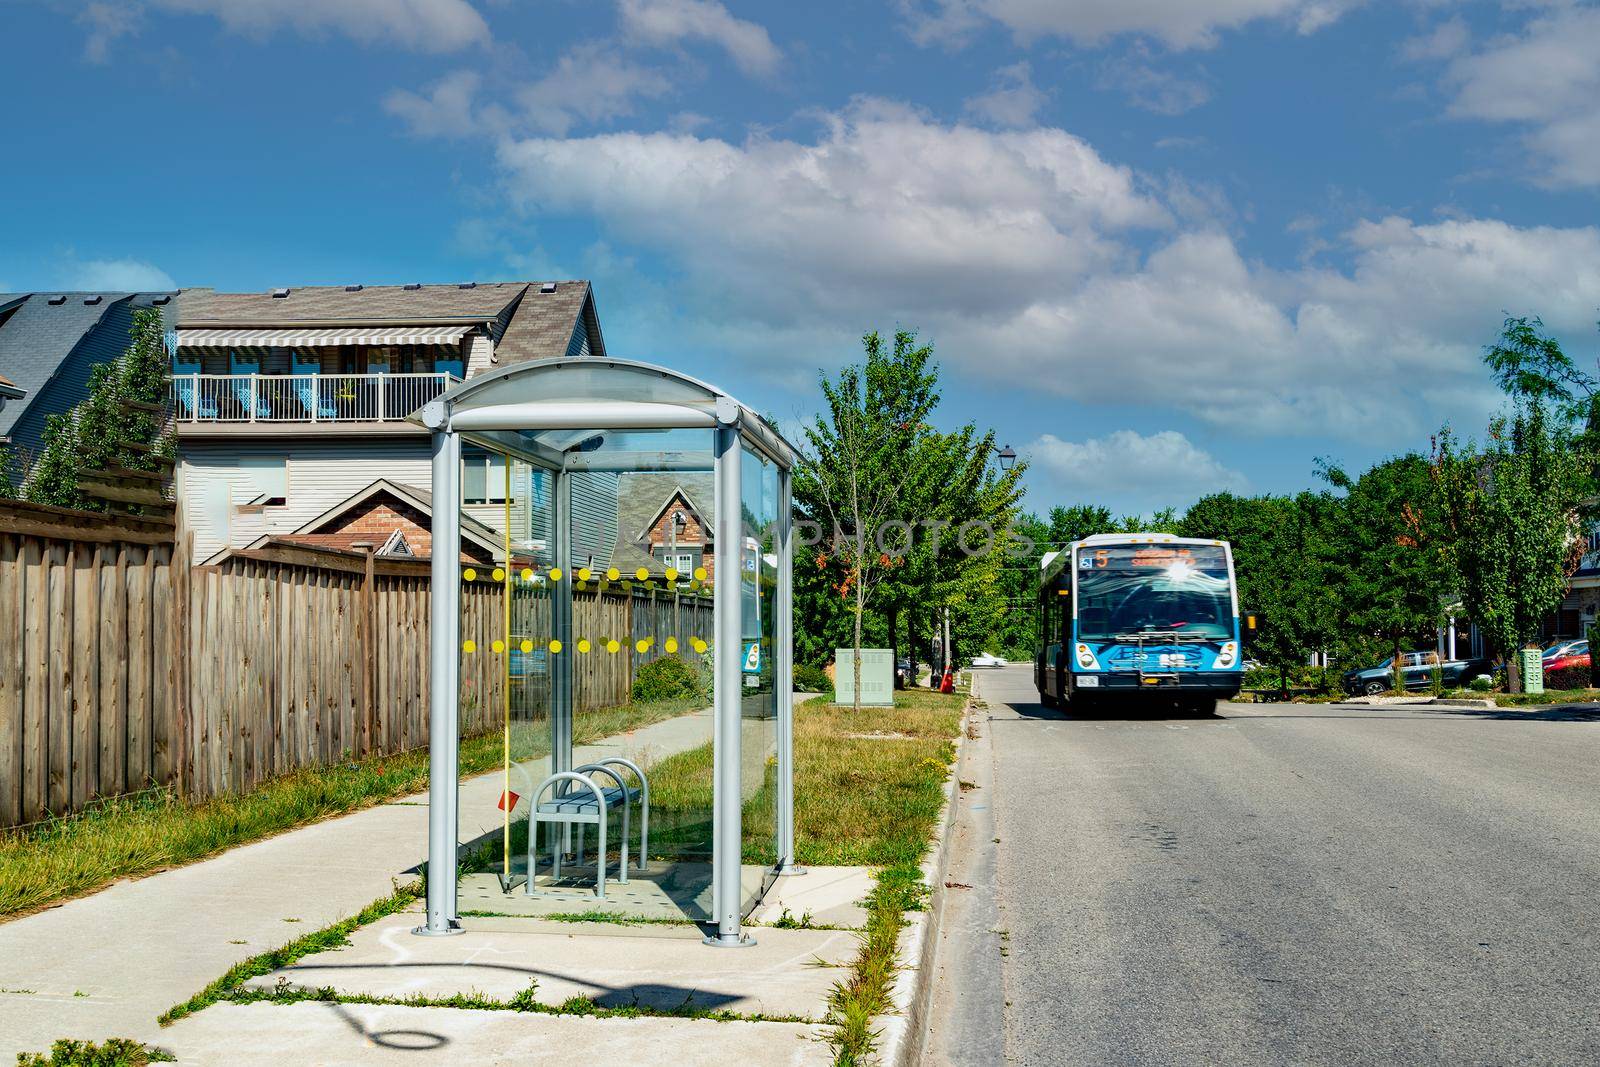 Glass bus stop in an urban area